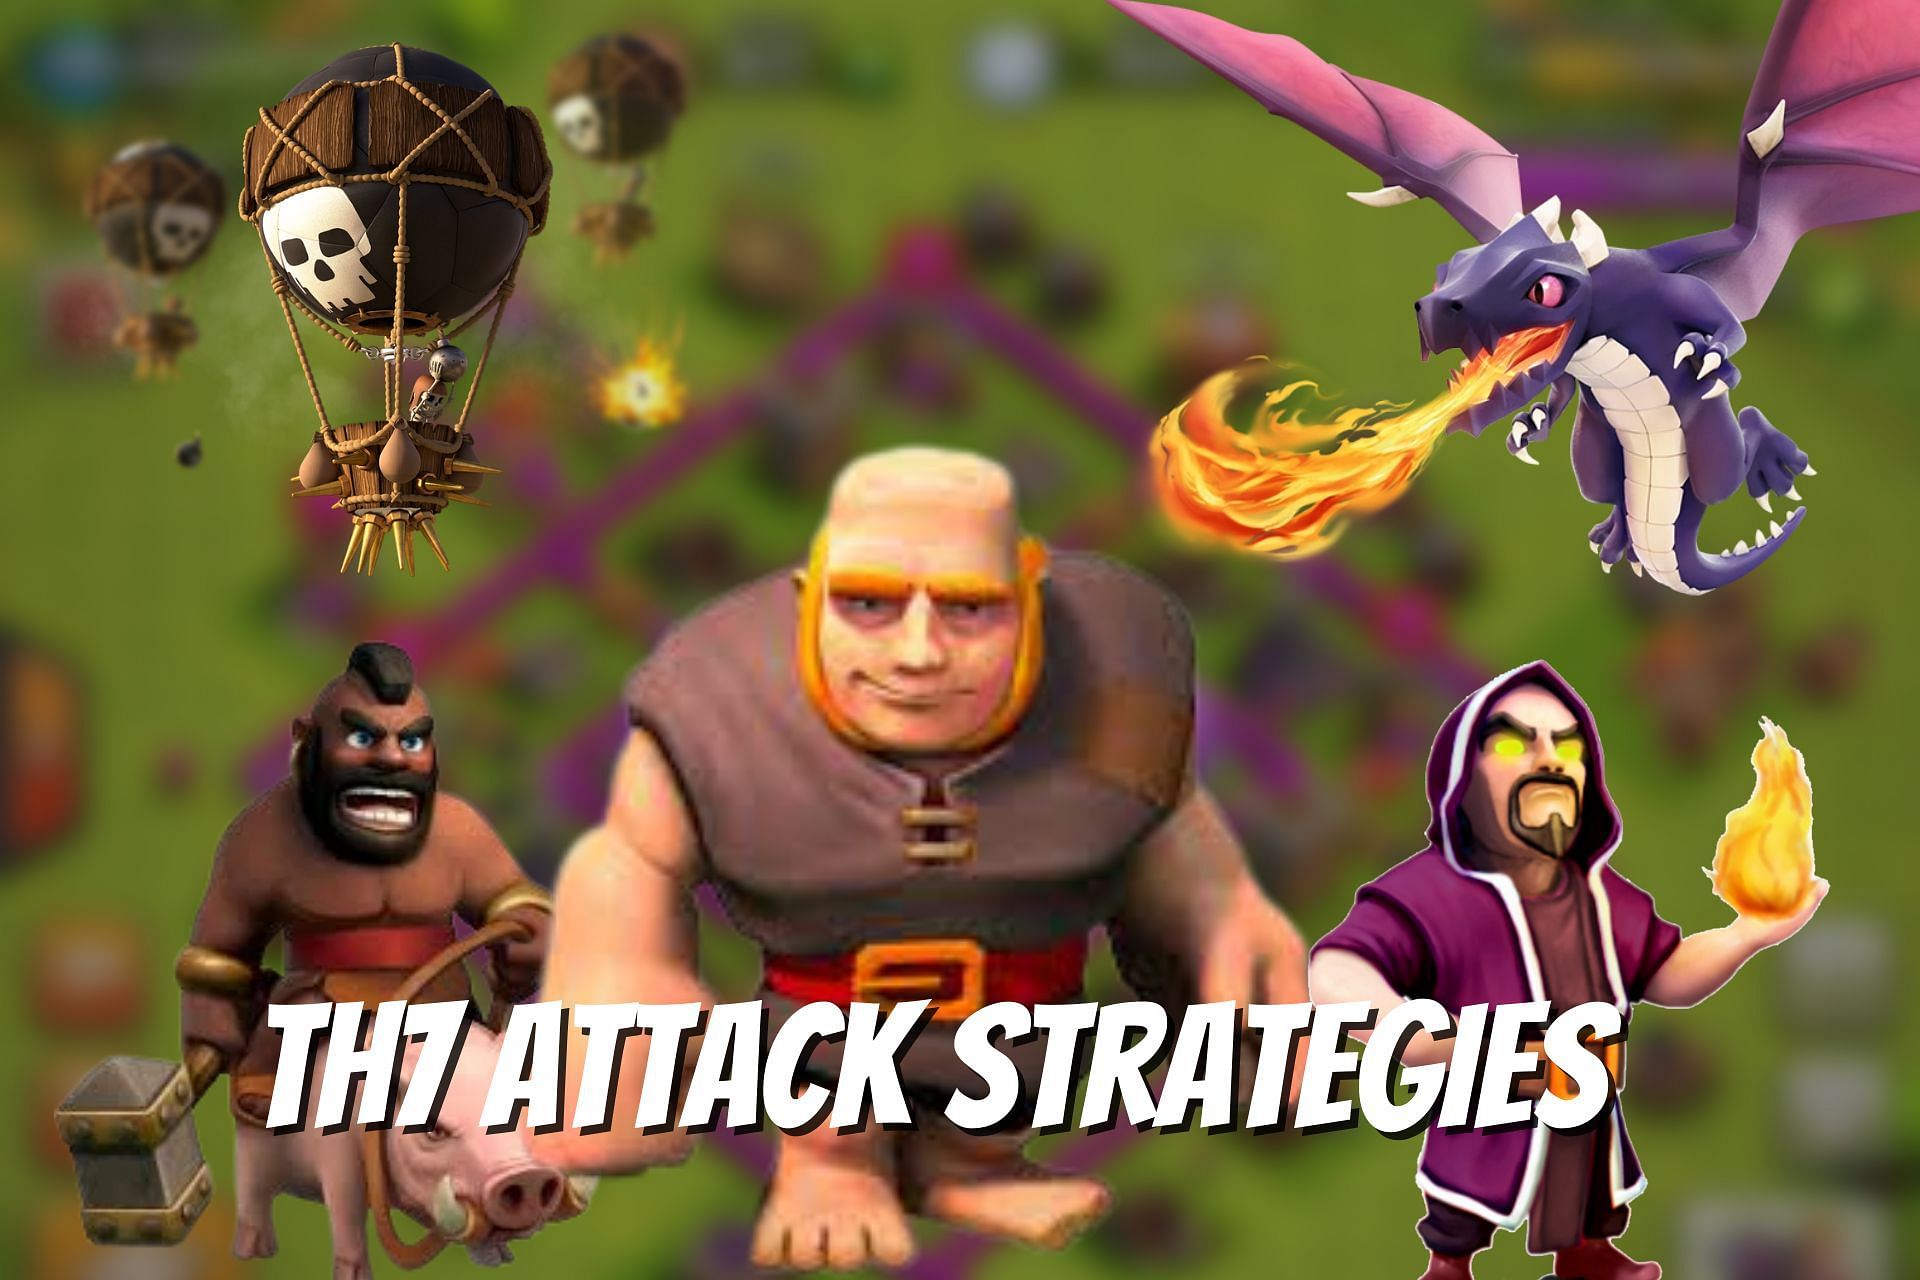 The top 5 TH7 attack strategies in Clash of Clans